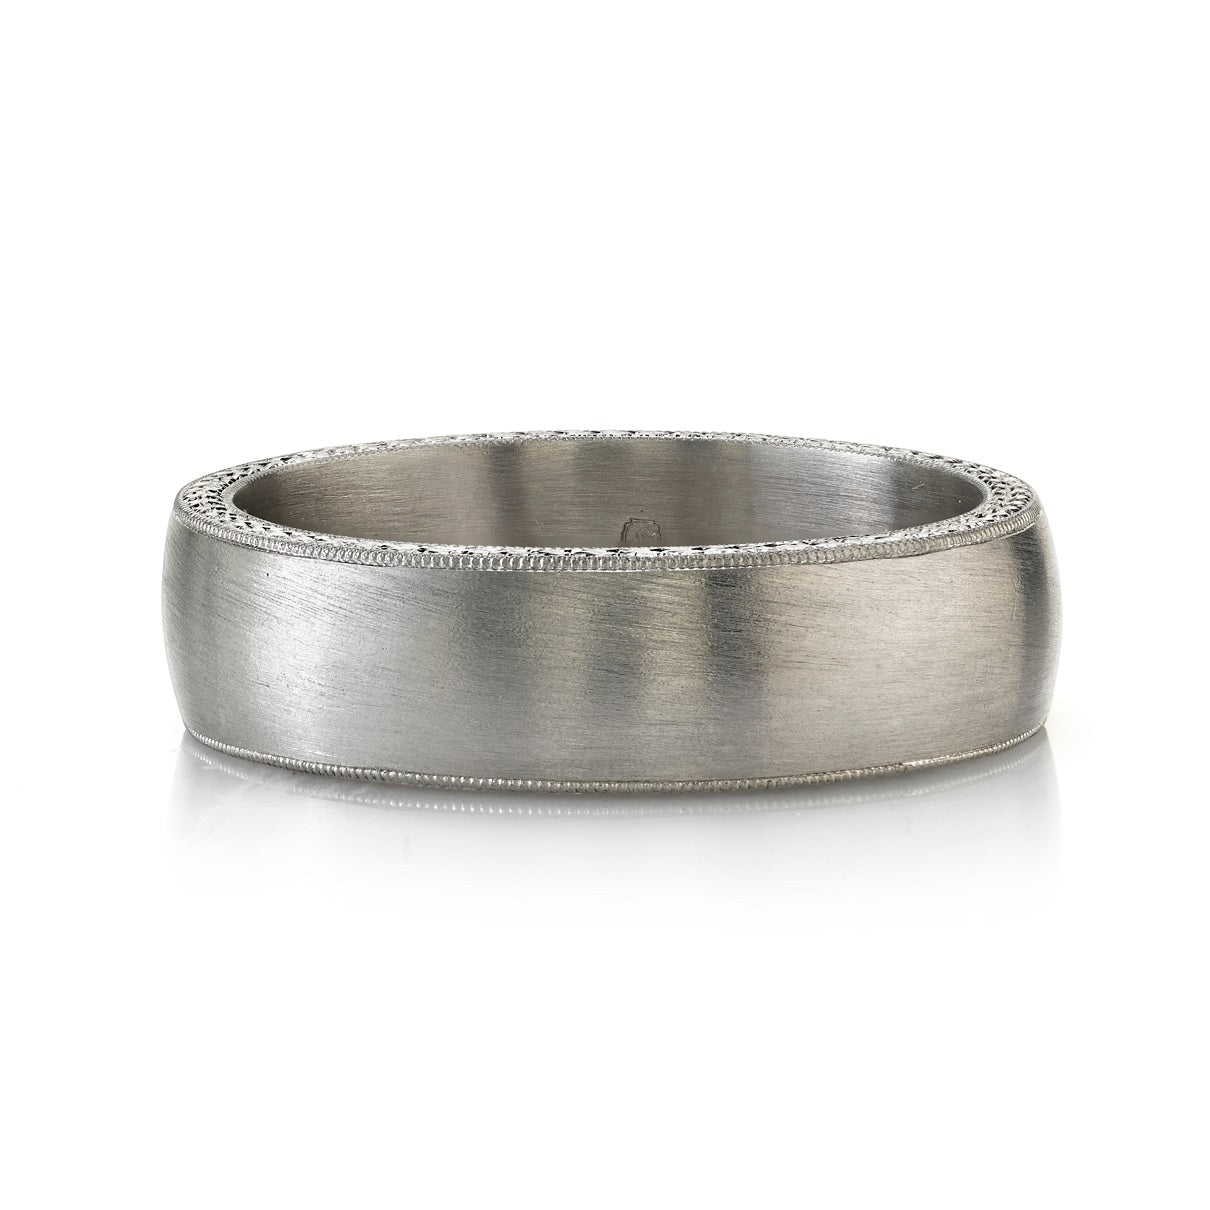 SINGLE STONE JOSEPH ENGRAVED 6MM BAND | 6mm handcrafted satin finished Men's band with engraved sidewalls.